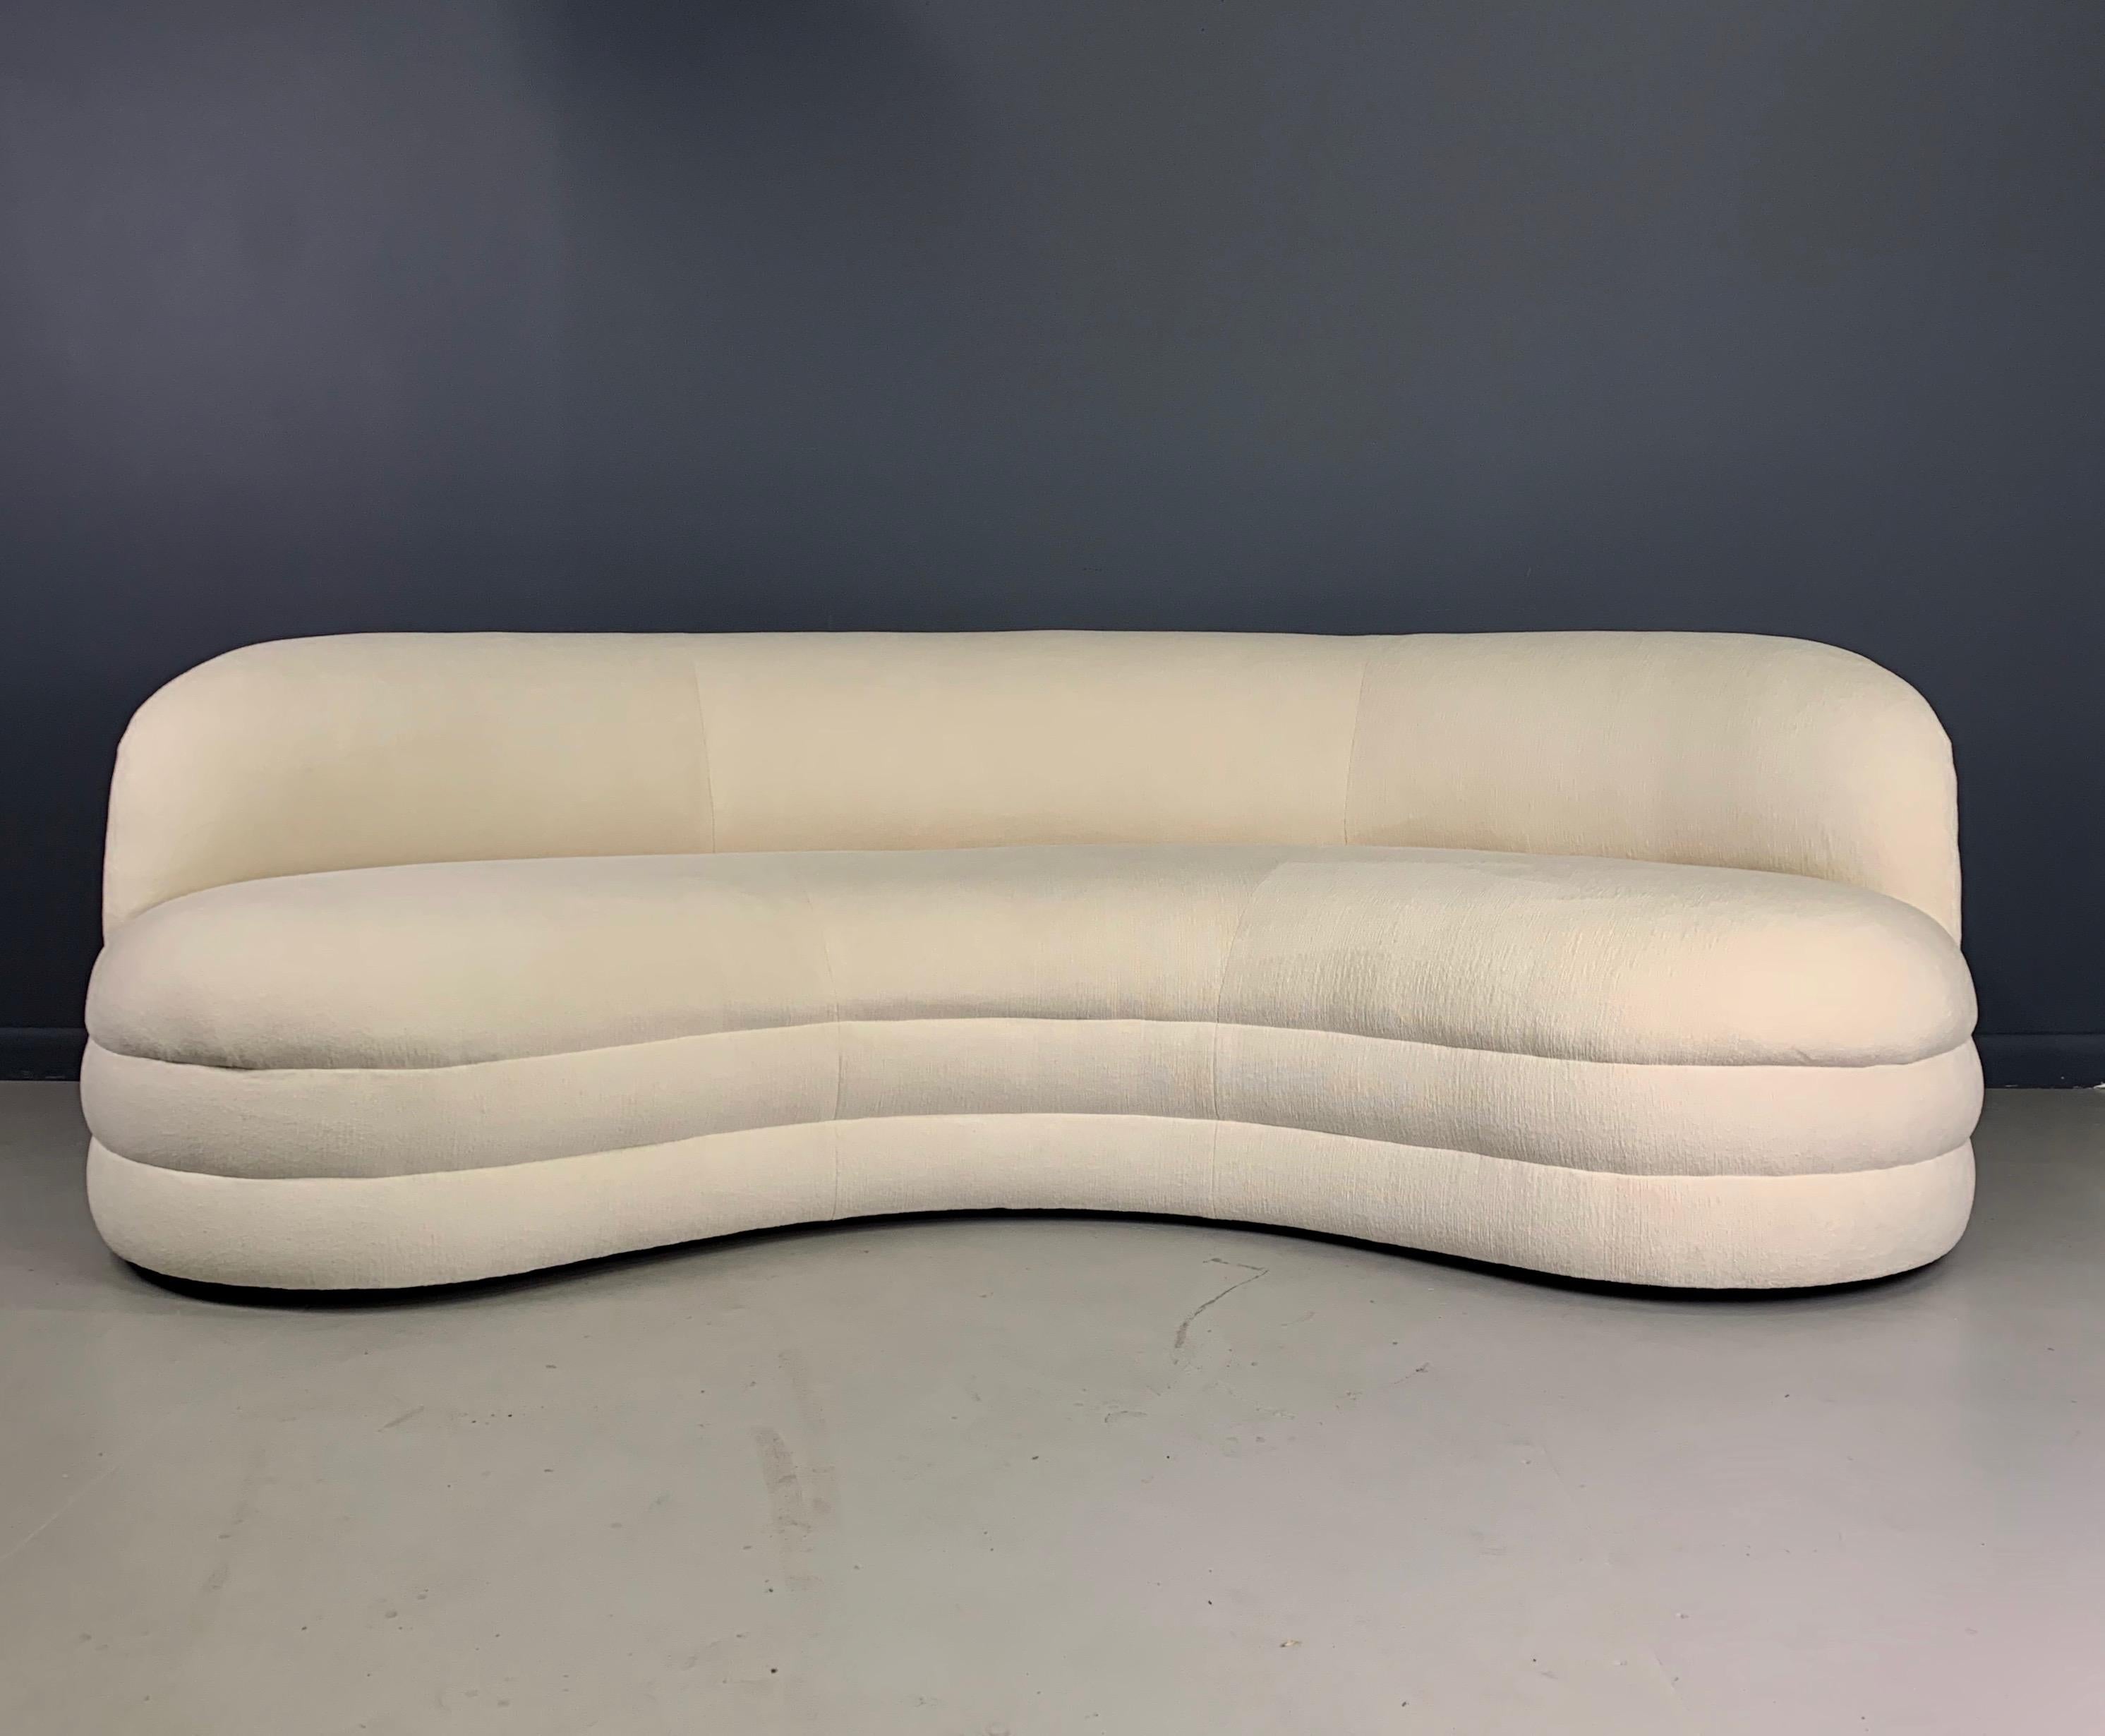 A unique kidney-shaped sofa, circa 1970s. The sofa features a nice sculptural modern design, with a curved arched back and a plinth base. The sofa has been redone from top to bottom with a beautiful textured white velvet. 

Measures: 84